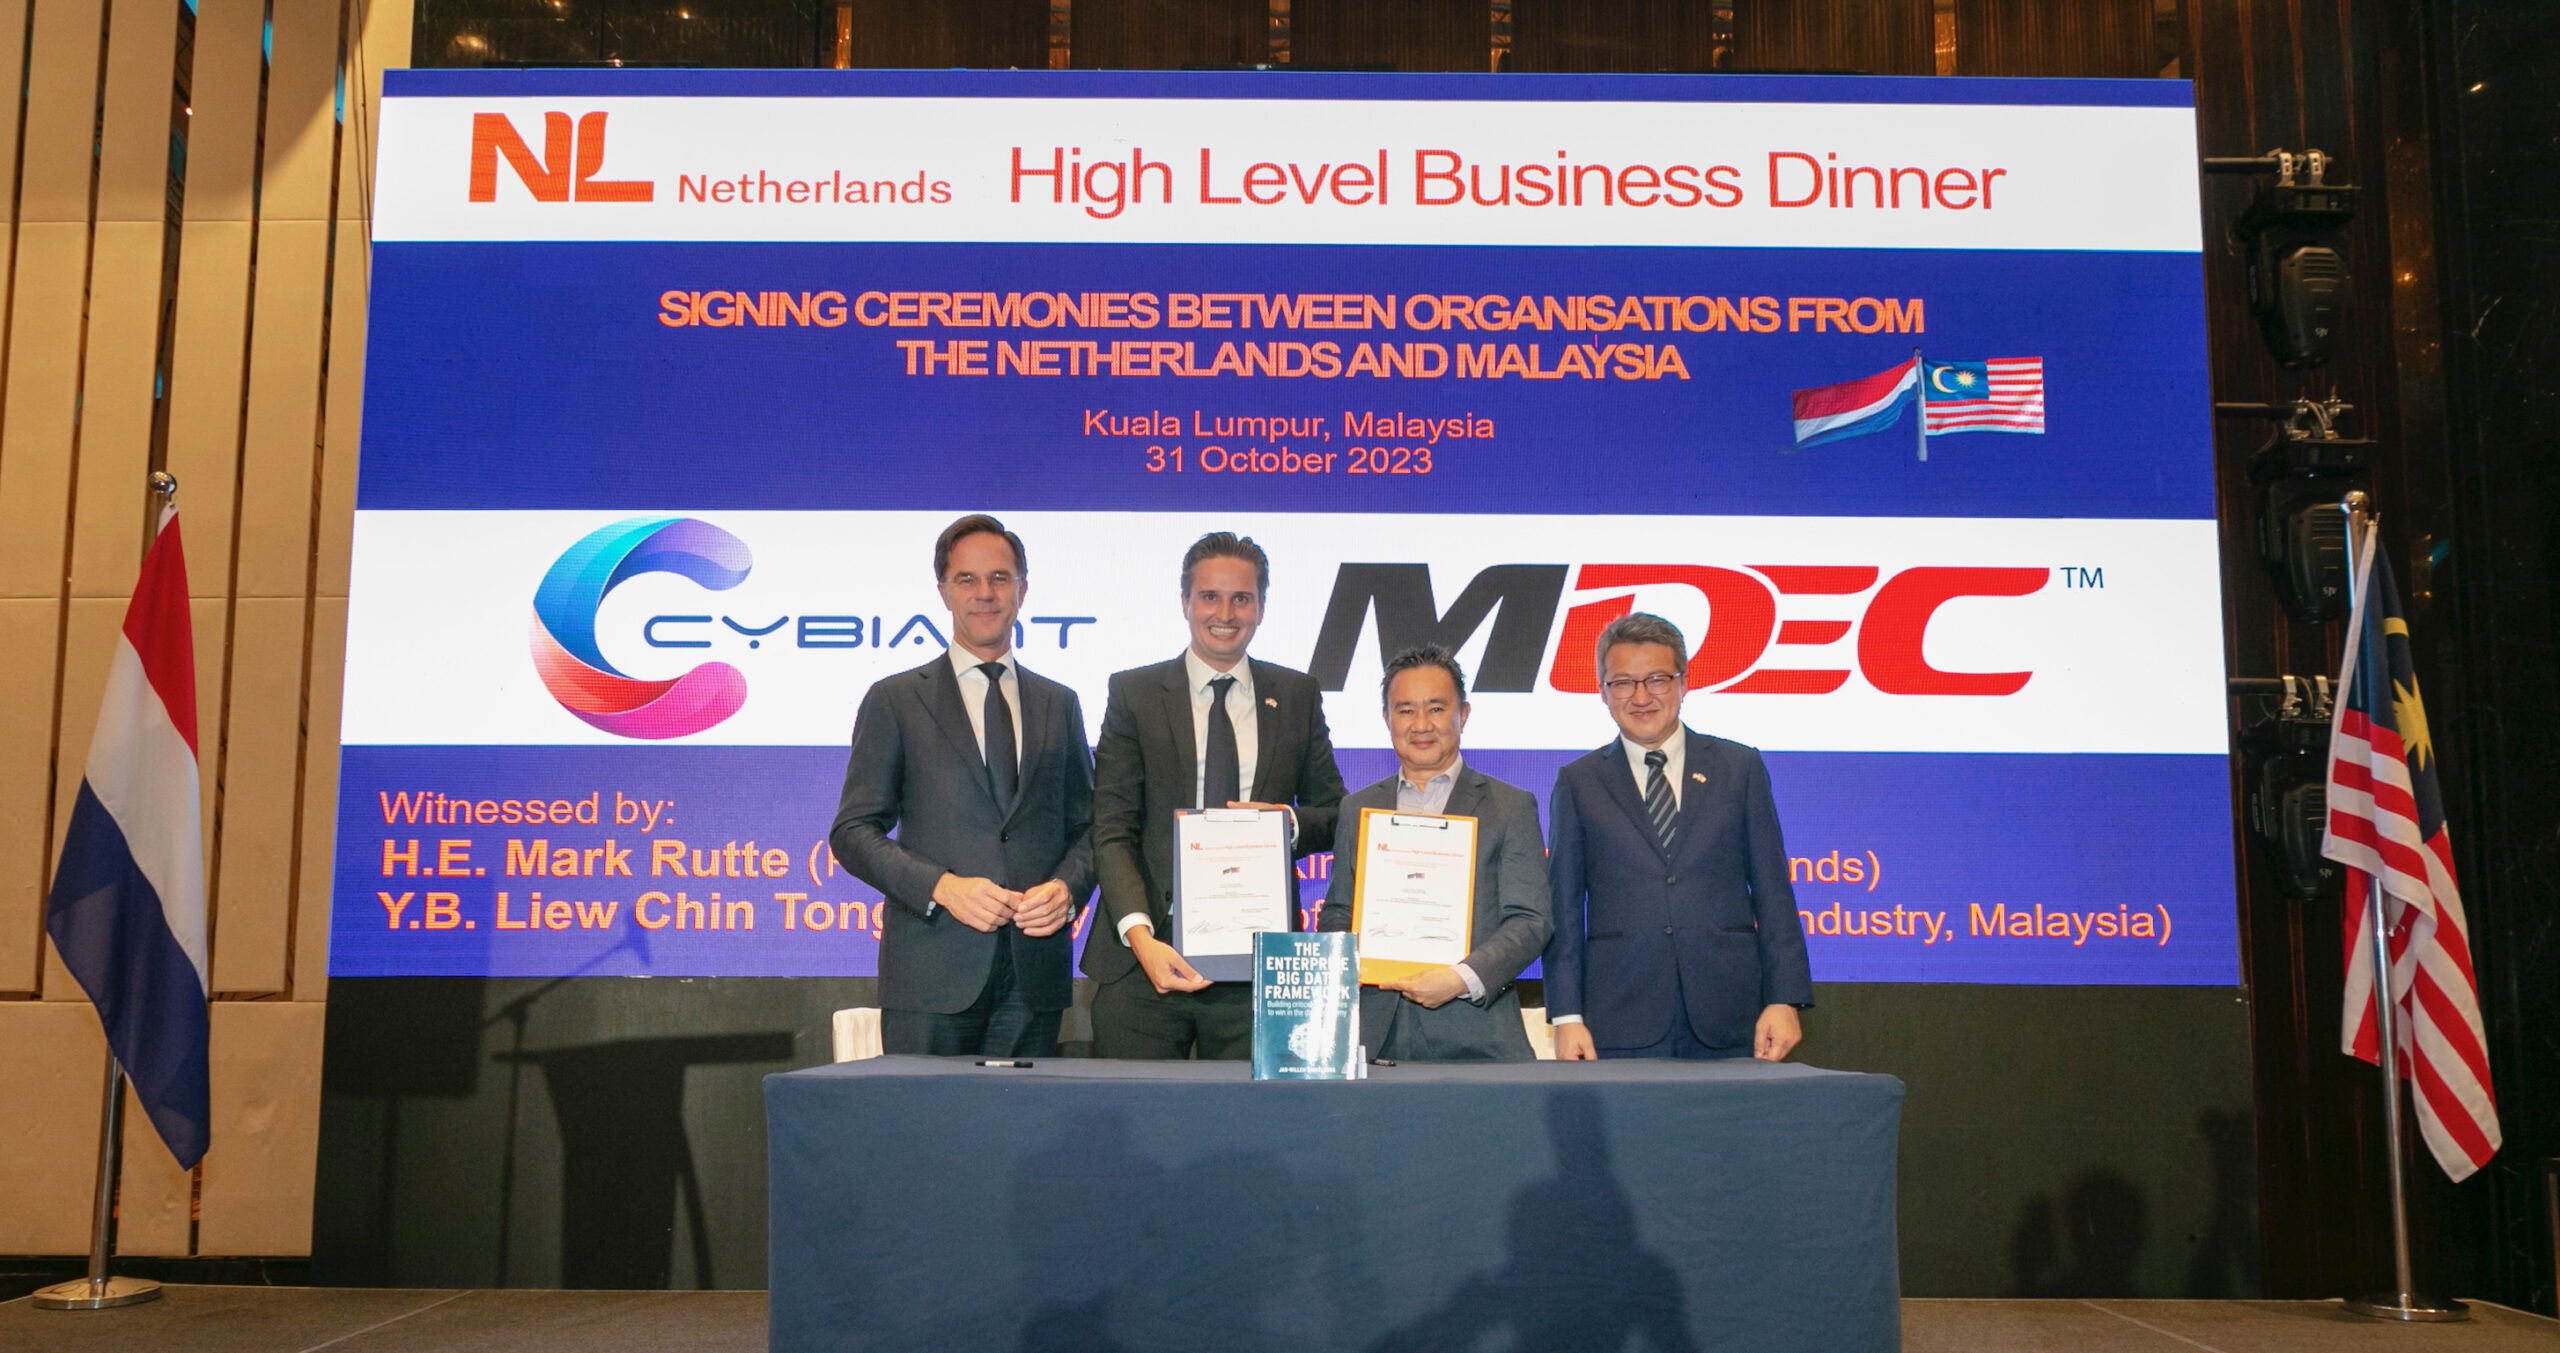 Cybiant and the Malaysia Digital Economy Corporation (MDEC) Sign Letter of Intent in the Presence of the Dutch Prime Minister